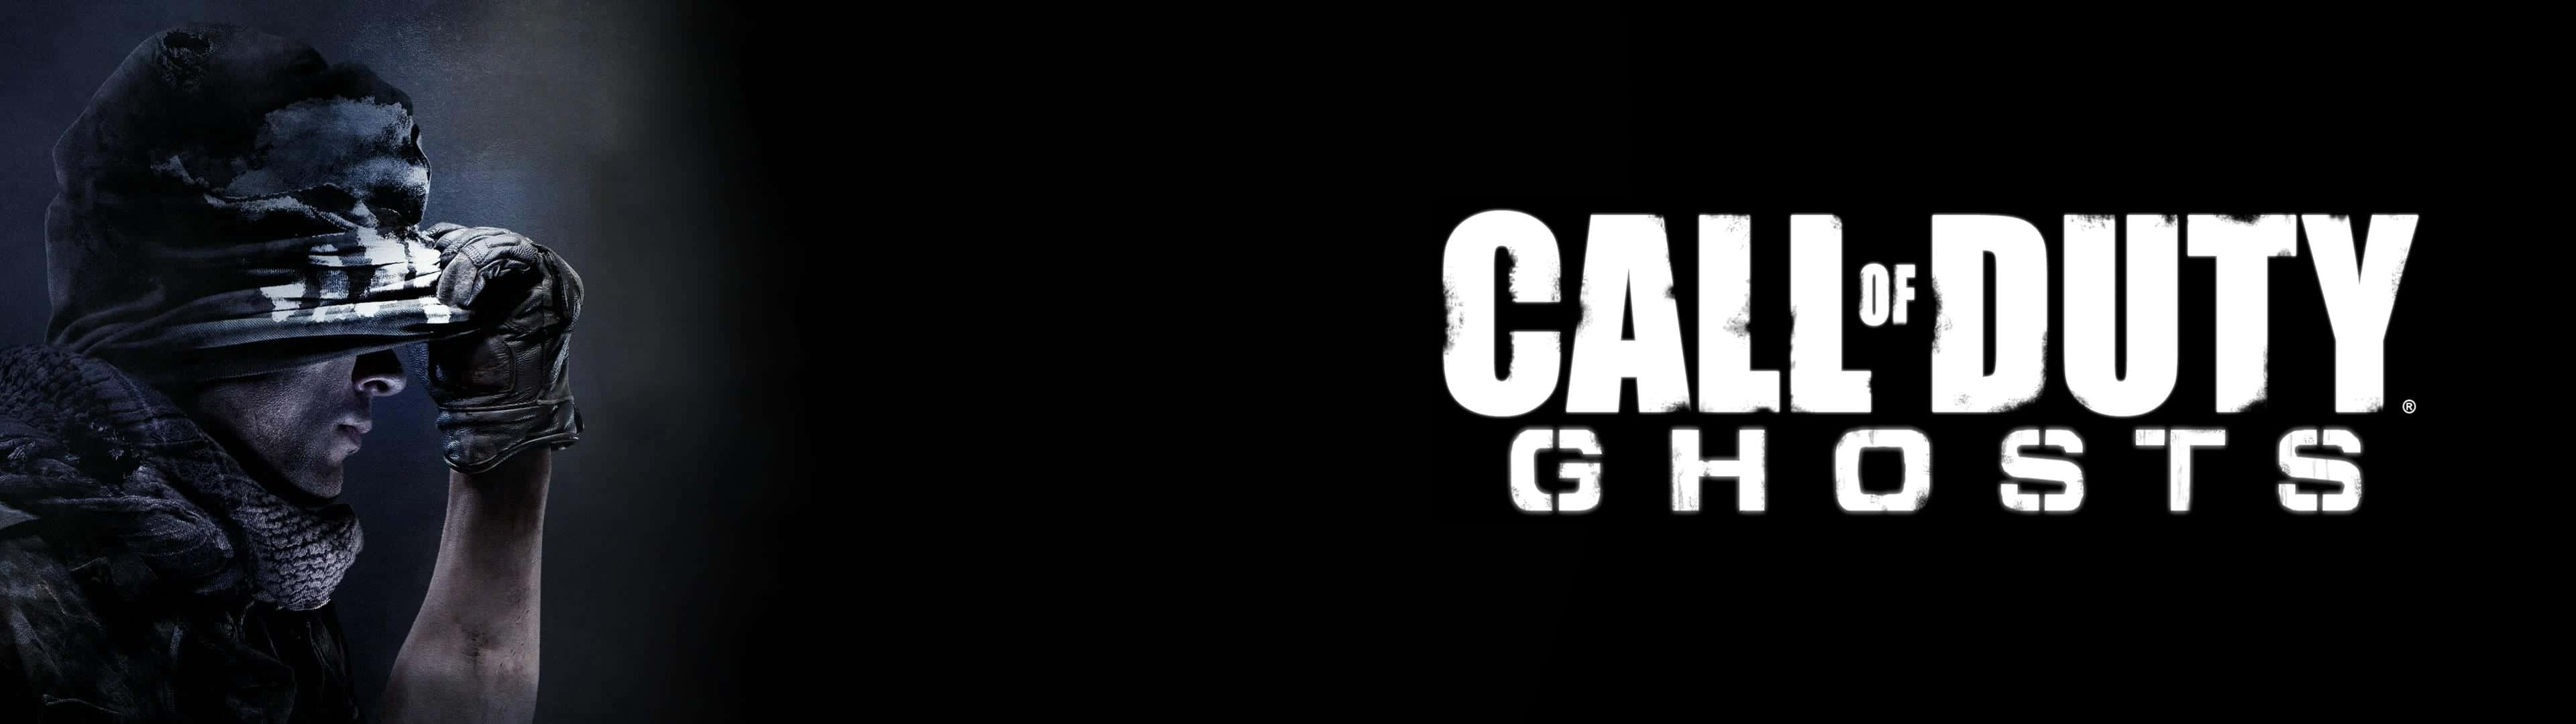 3840X1080 Call Of Duty Ghosts Picture